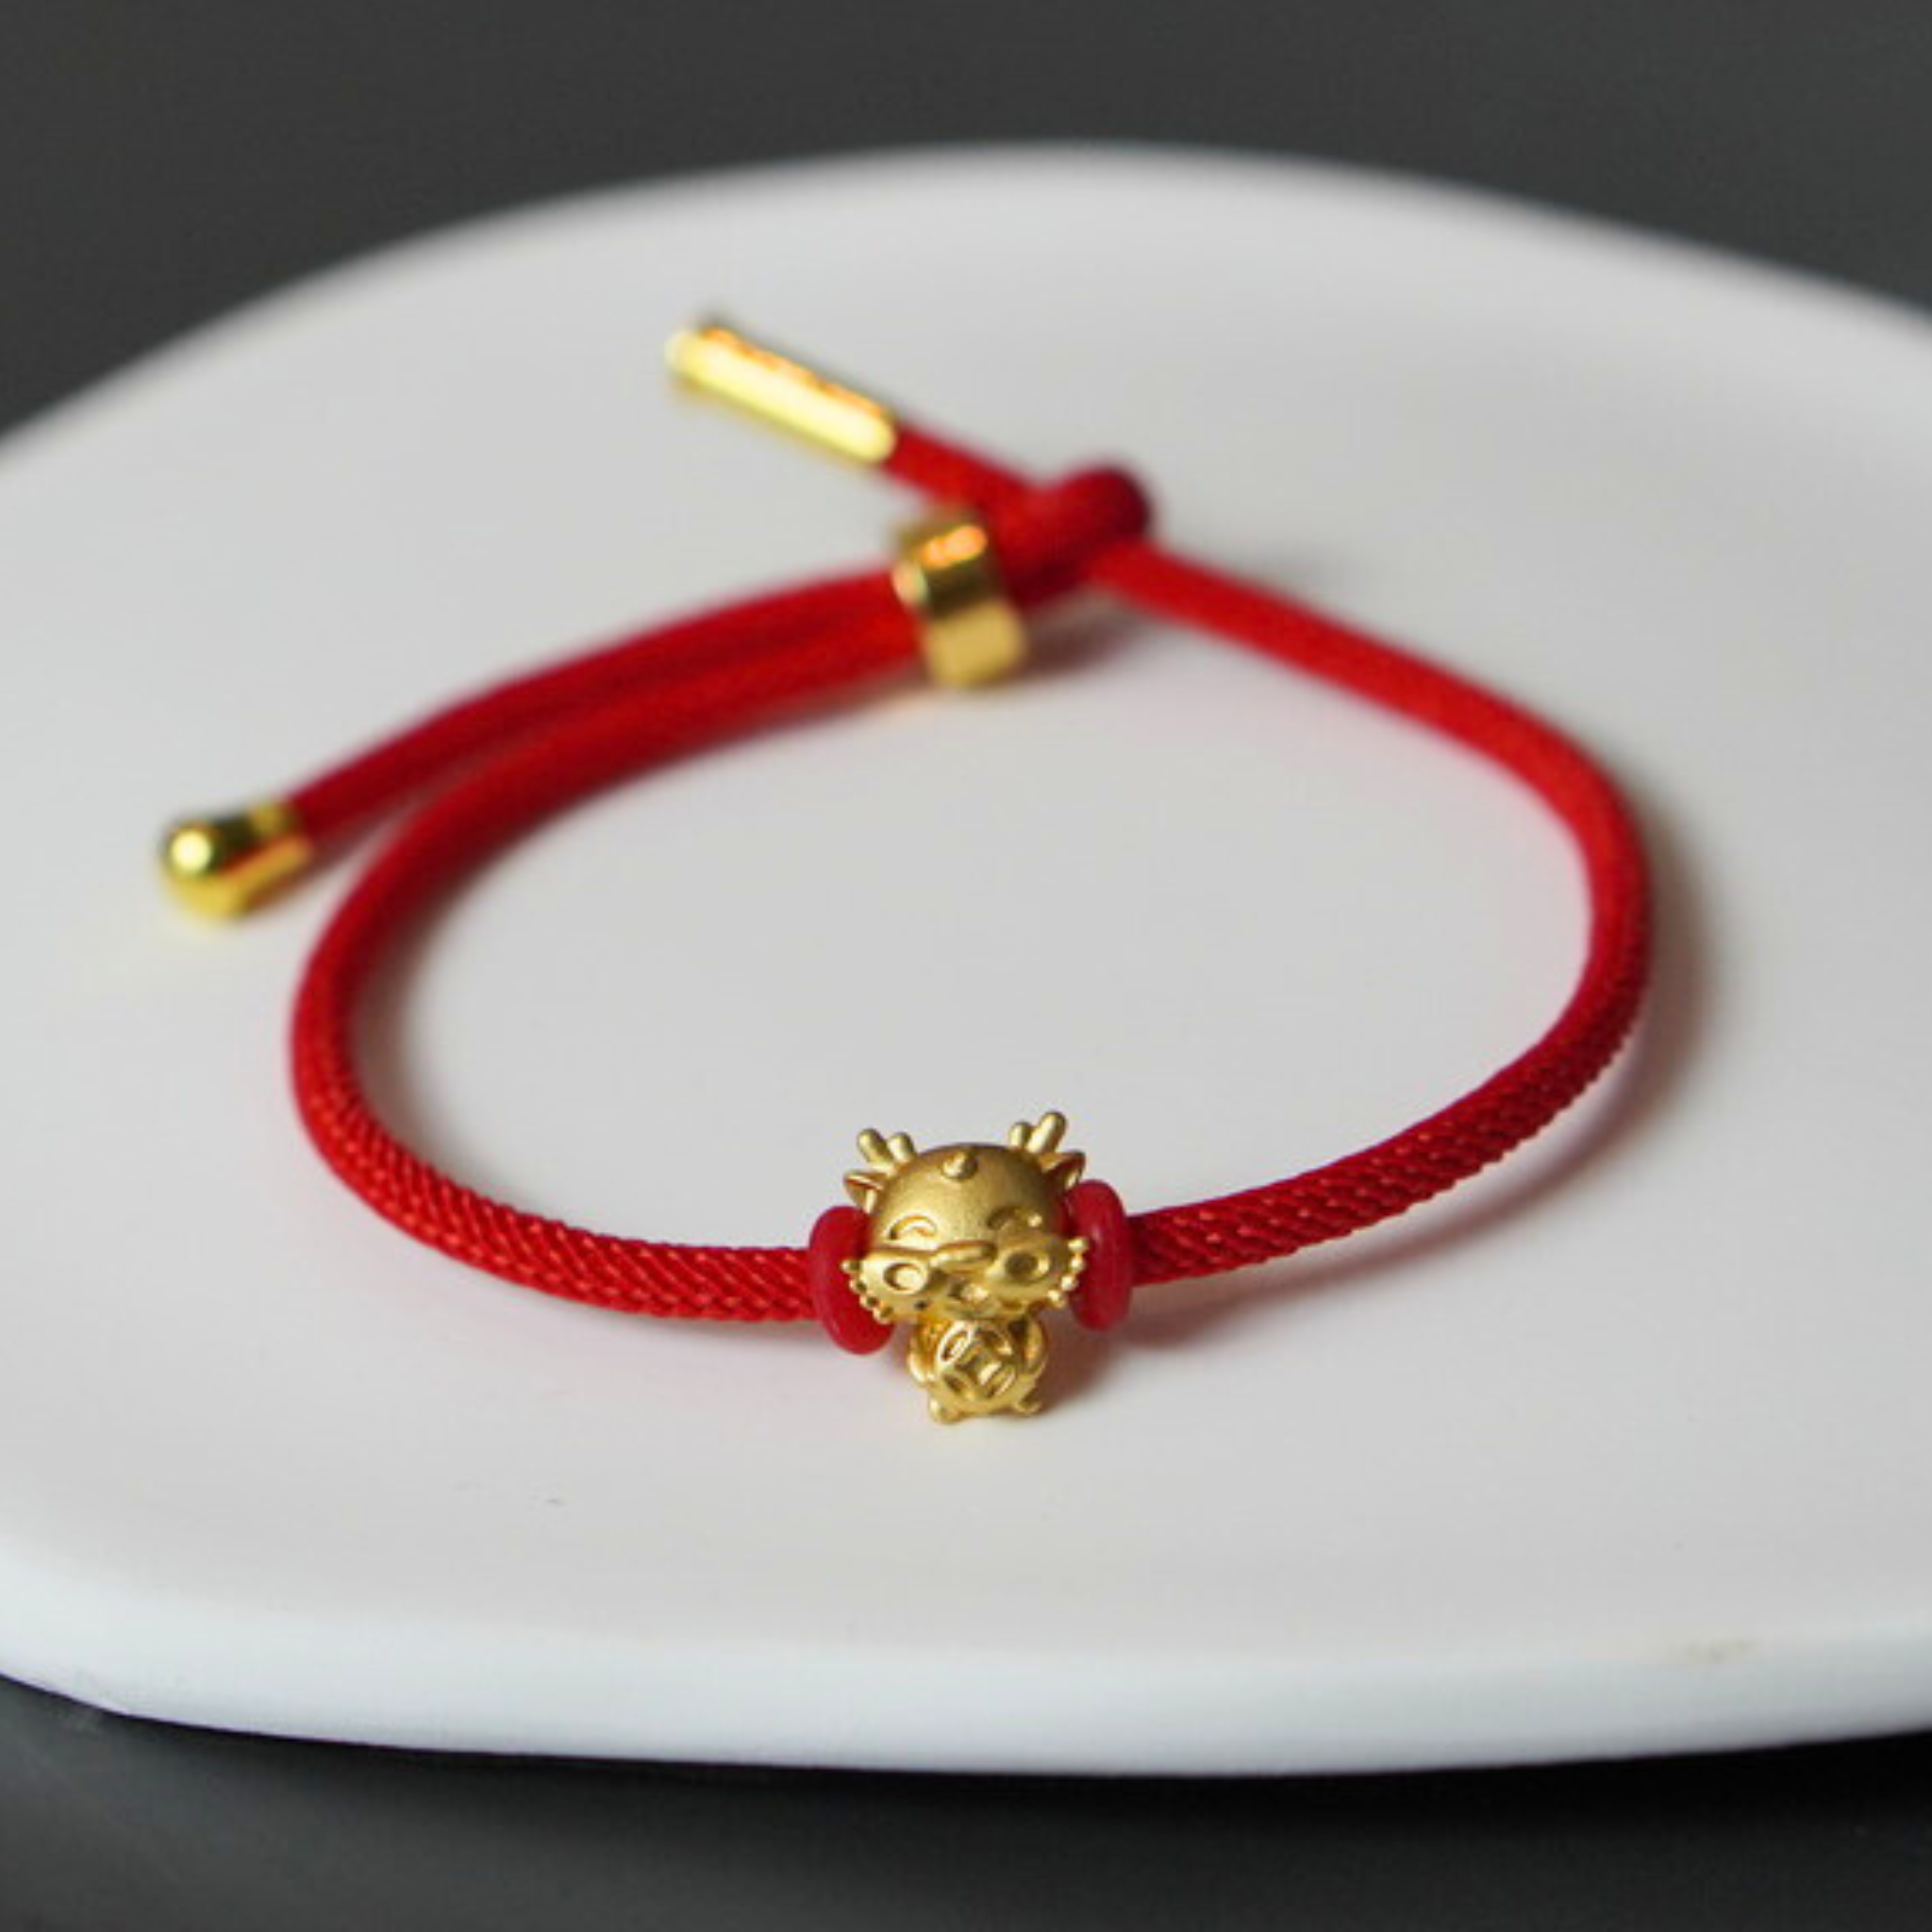 How to Activate Your Pixiu Bracelet: A Step-by-Step Guide